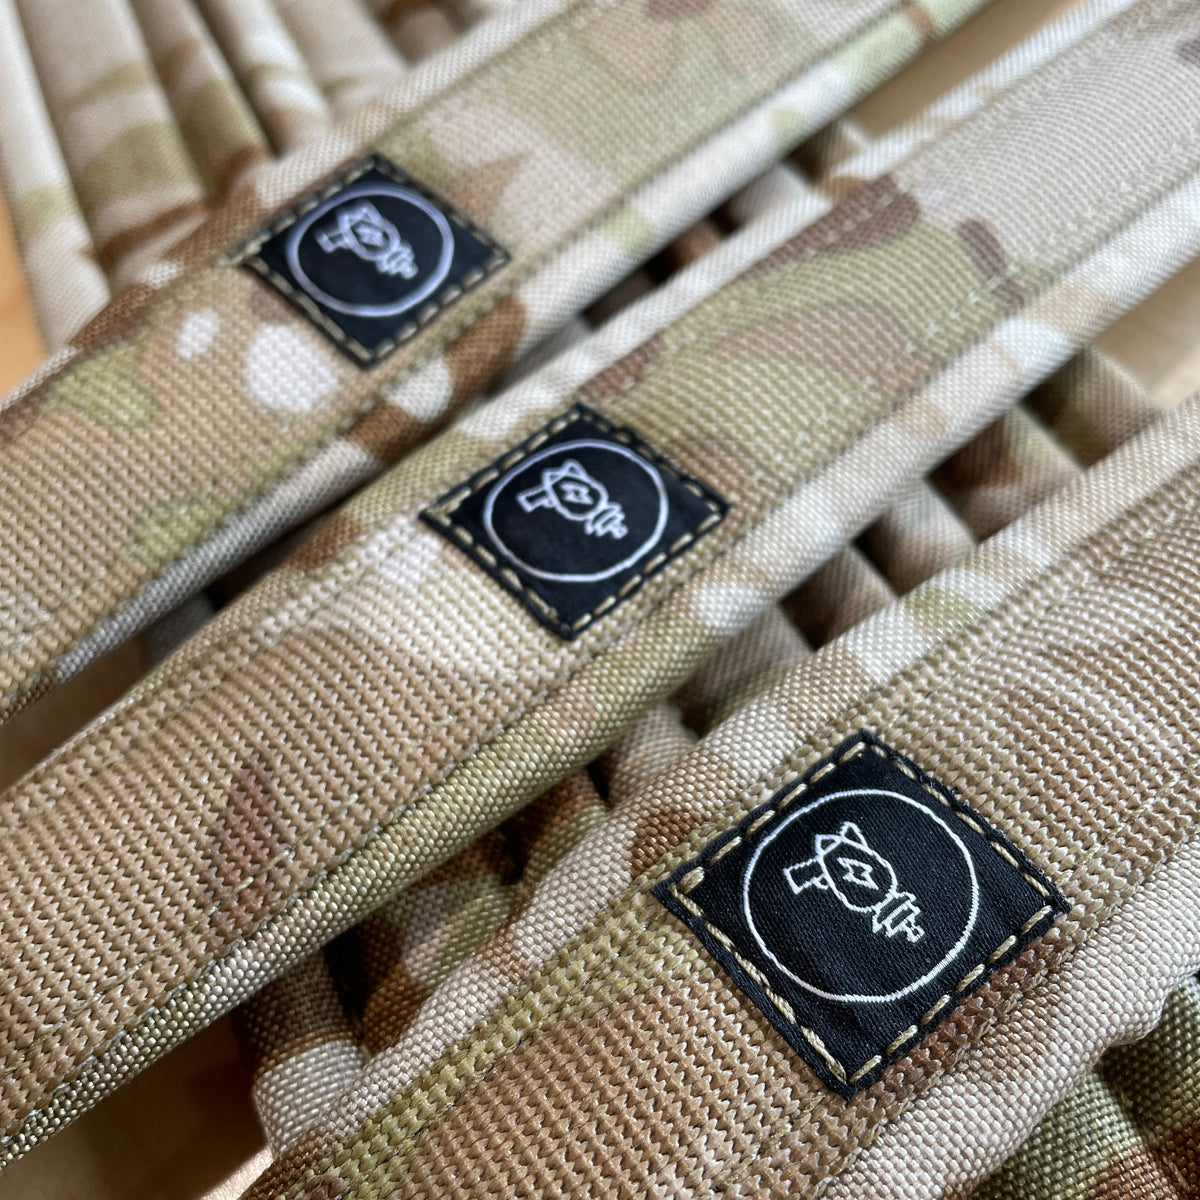 Pew Pew Tactical Padded Sling ARID MULTICAM - TriStar Trading Co.